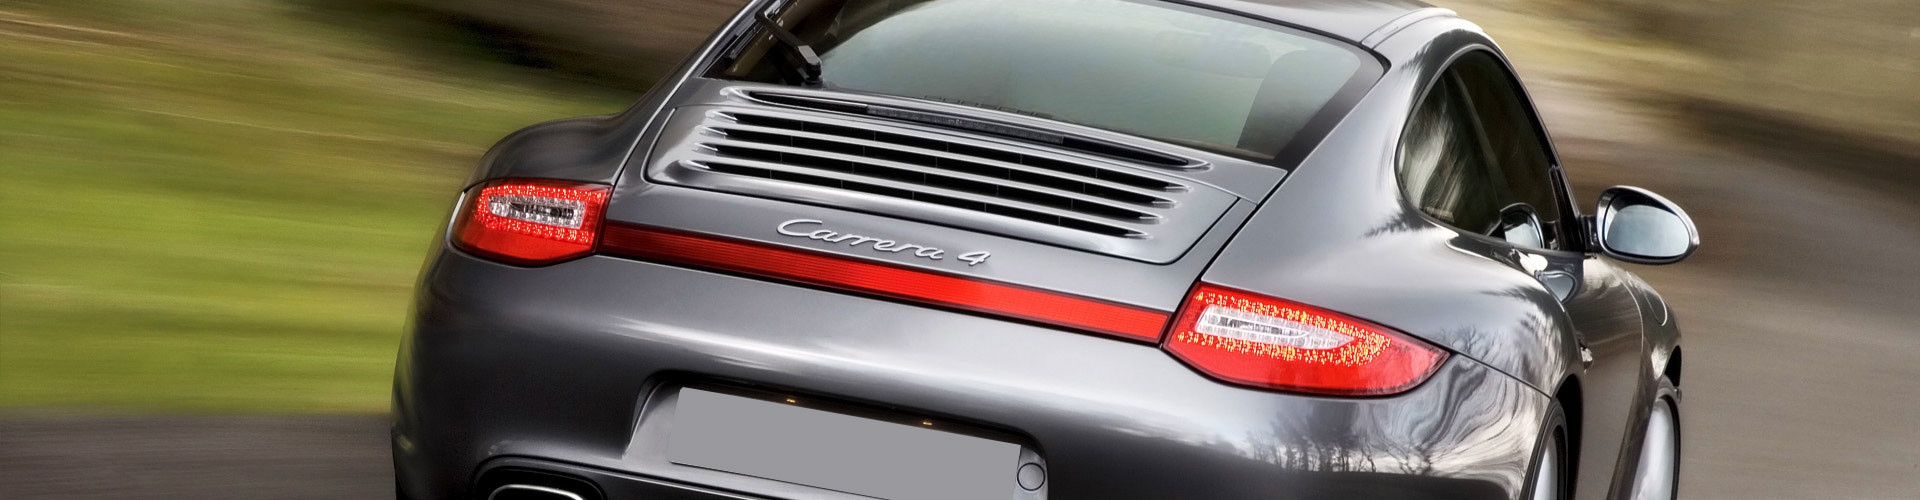 buyers guide to the Porsche 911 997